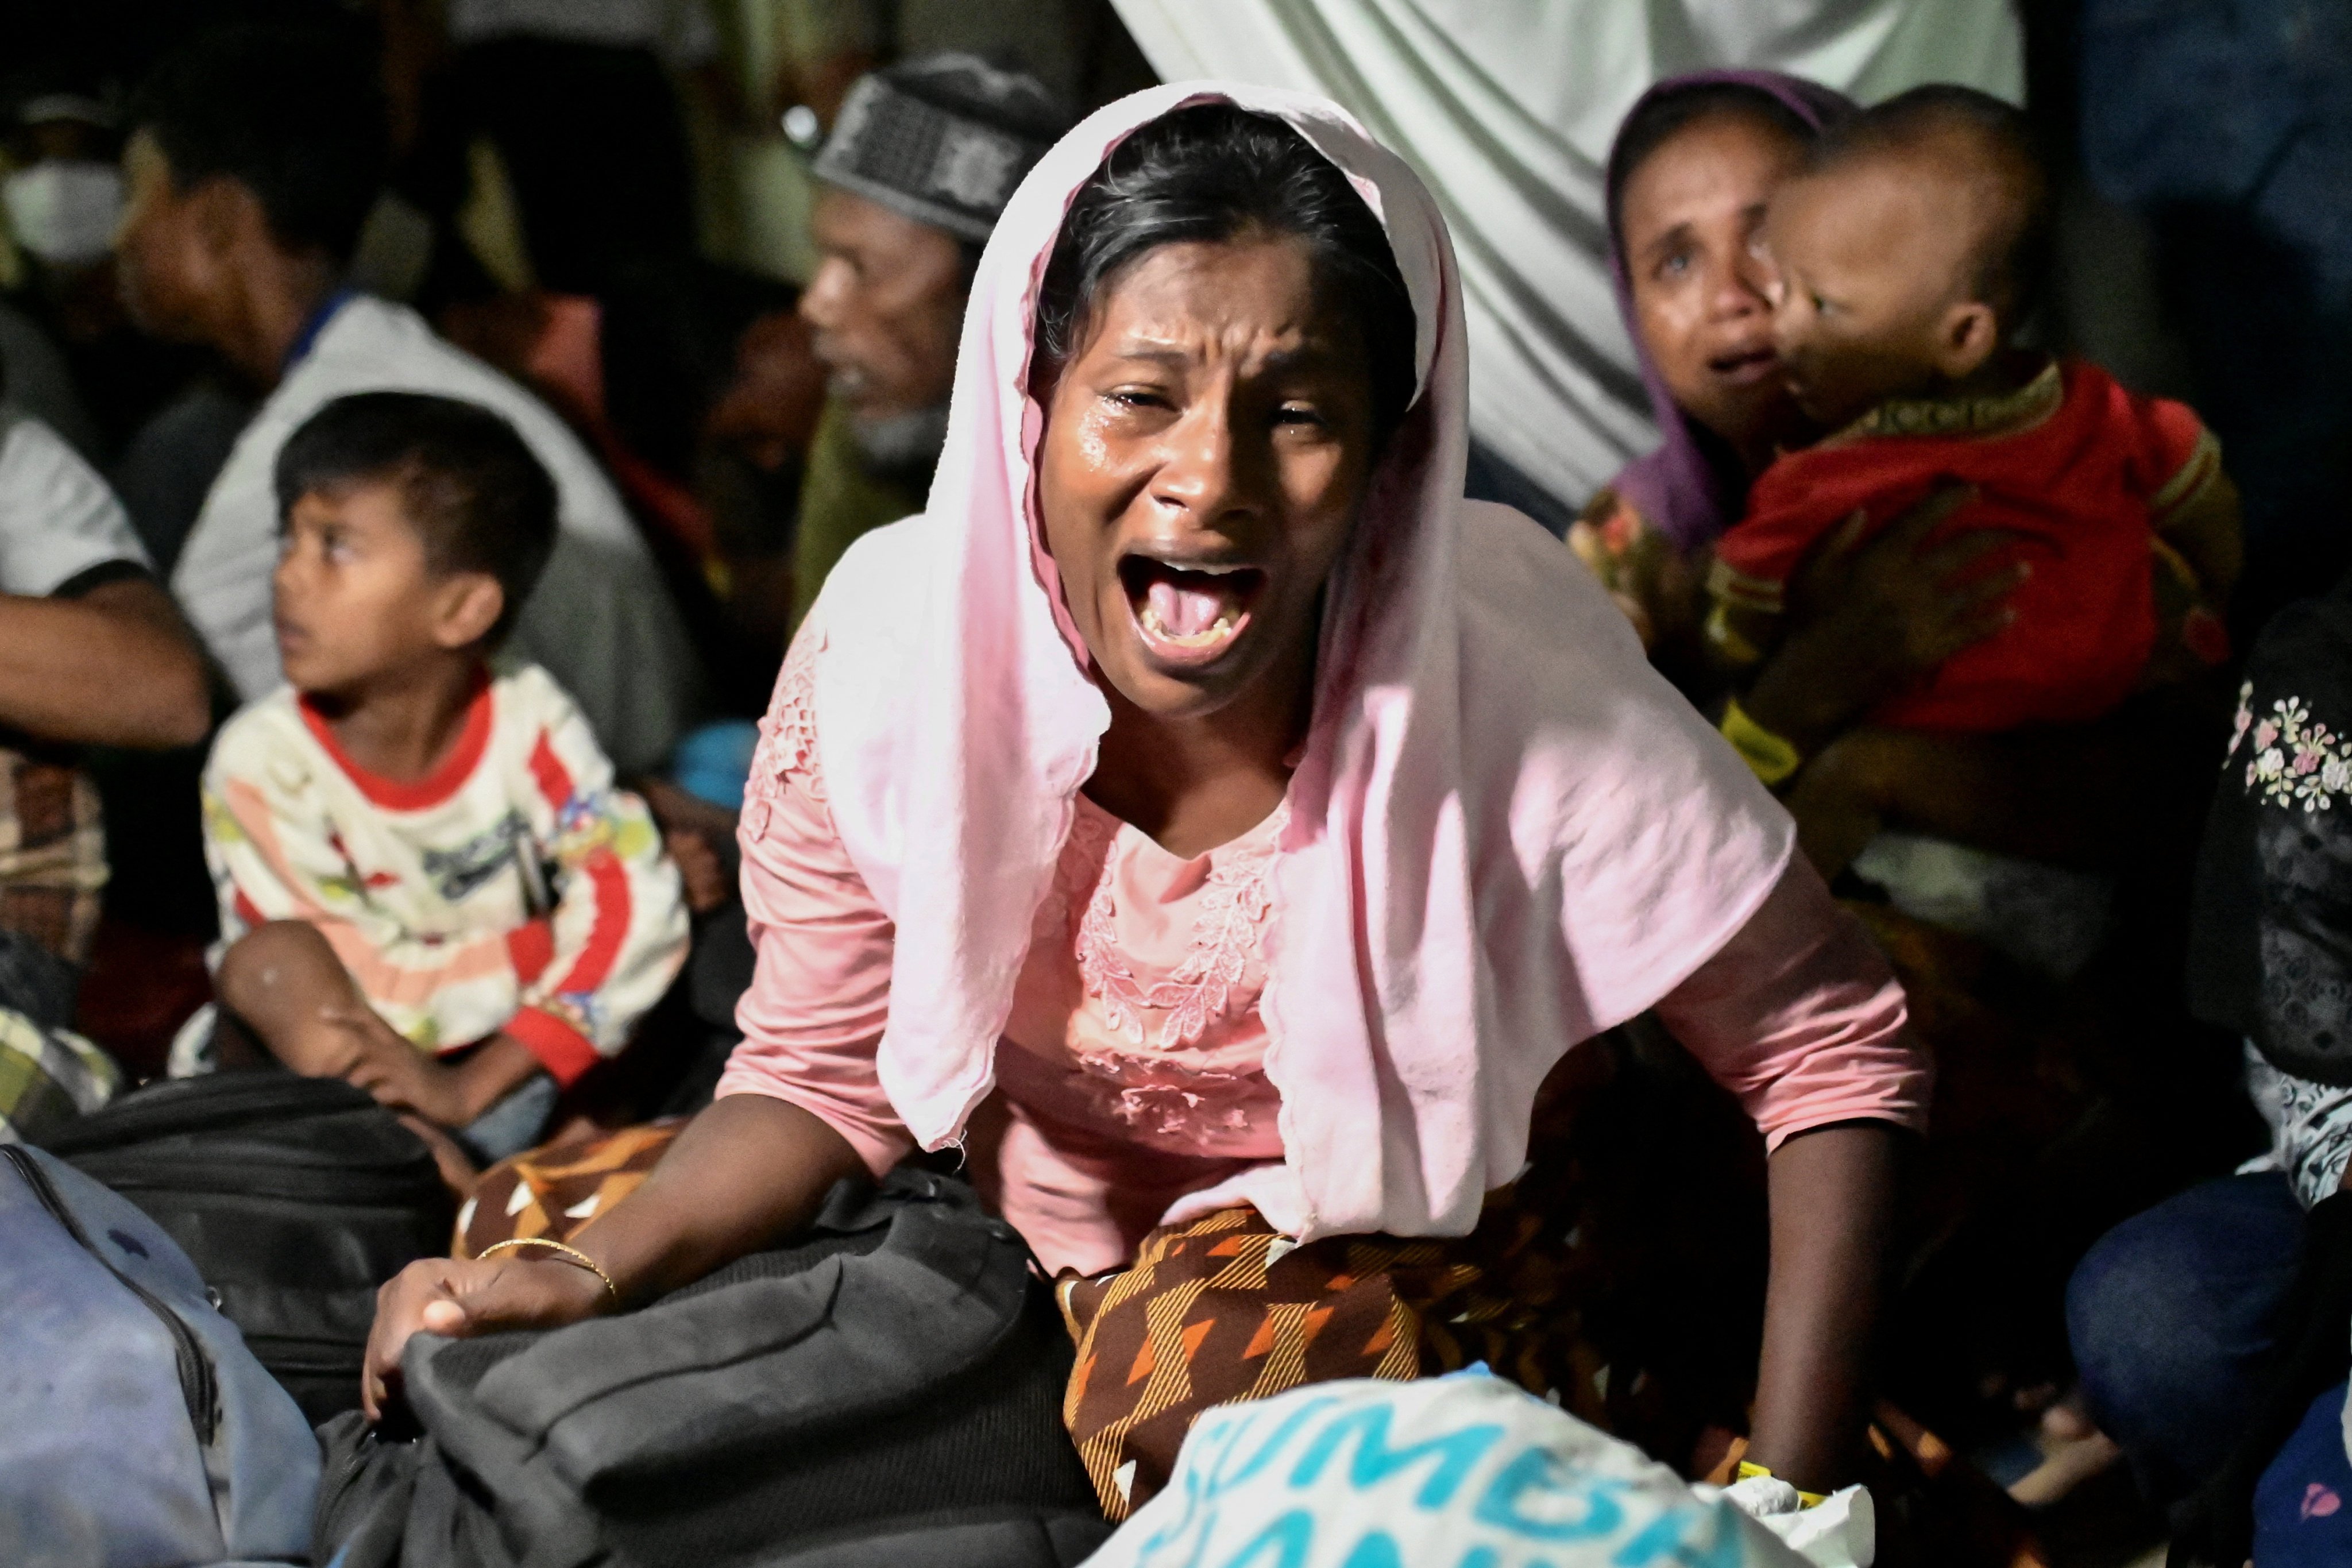 A Rohingya Muslim woman reacts as she is relocated from her temporary shelter following a protest for the deportation of the Rohingya refugees in Banda Aceh, Indonesia on Thursday. Photo: Reuters